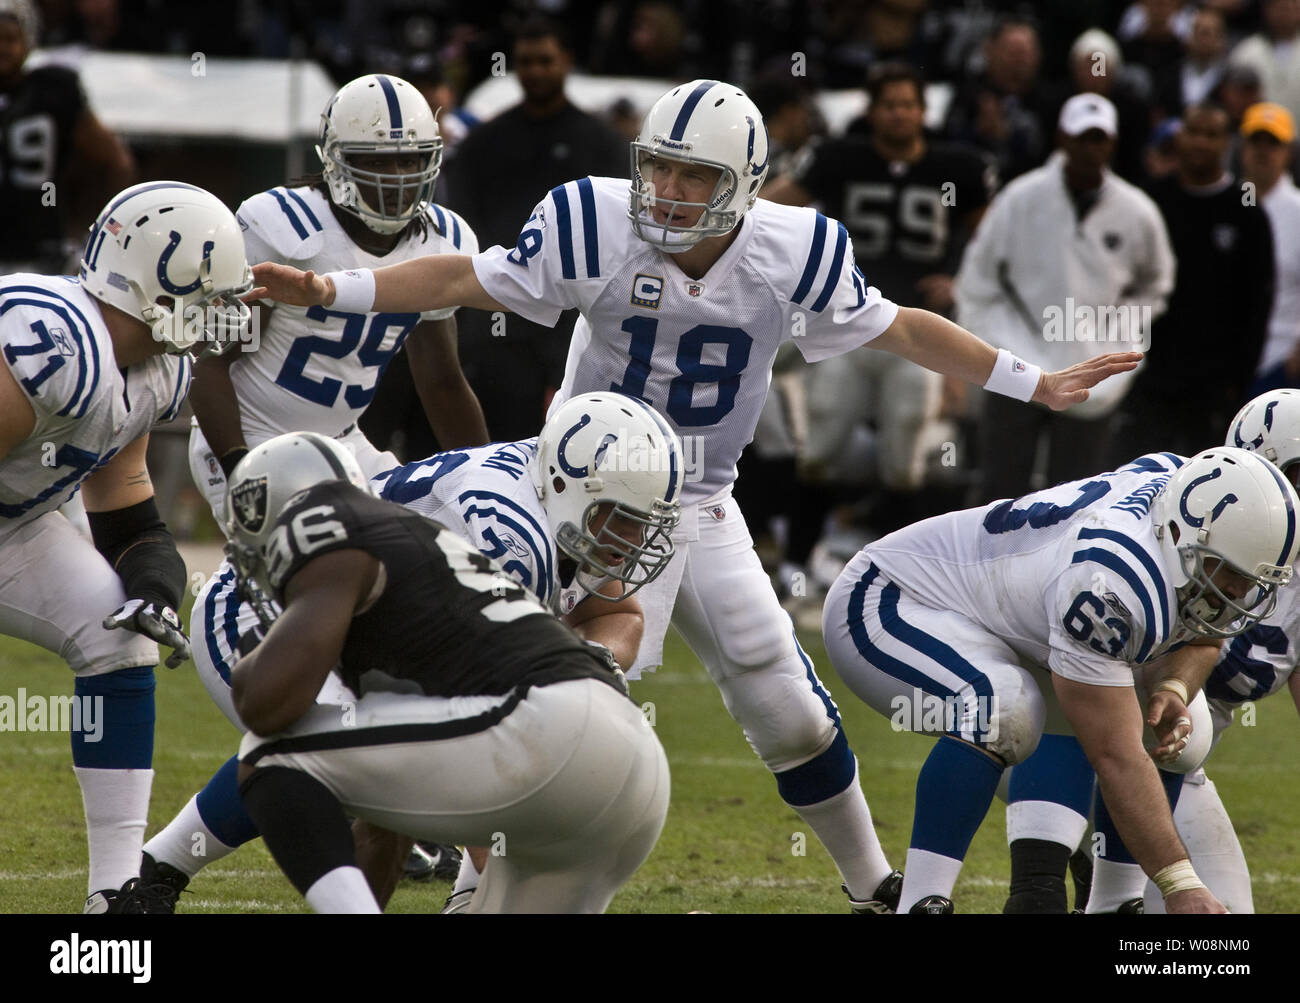 Indianapolis Colts Peyton Manning changes the play against the  Oakland Raiders at the Oakland Coliseum in Oakland, California on December 26, 2010.  The Colts defeated the Raiders 31-26.     UPI/Terry Schmitt Stock Photo